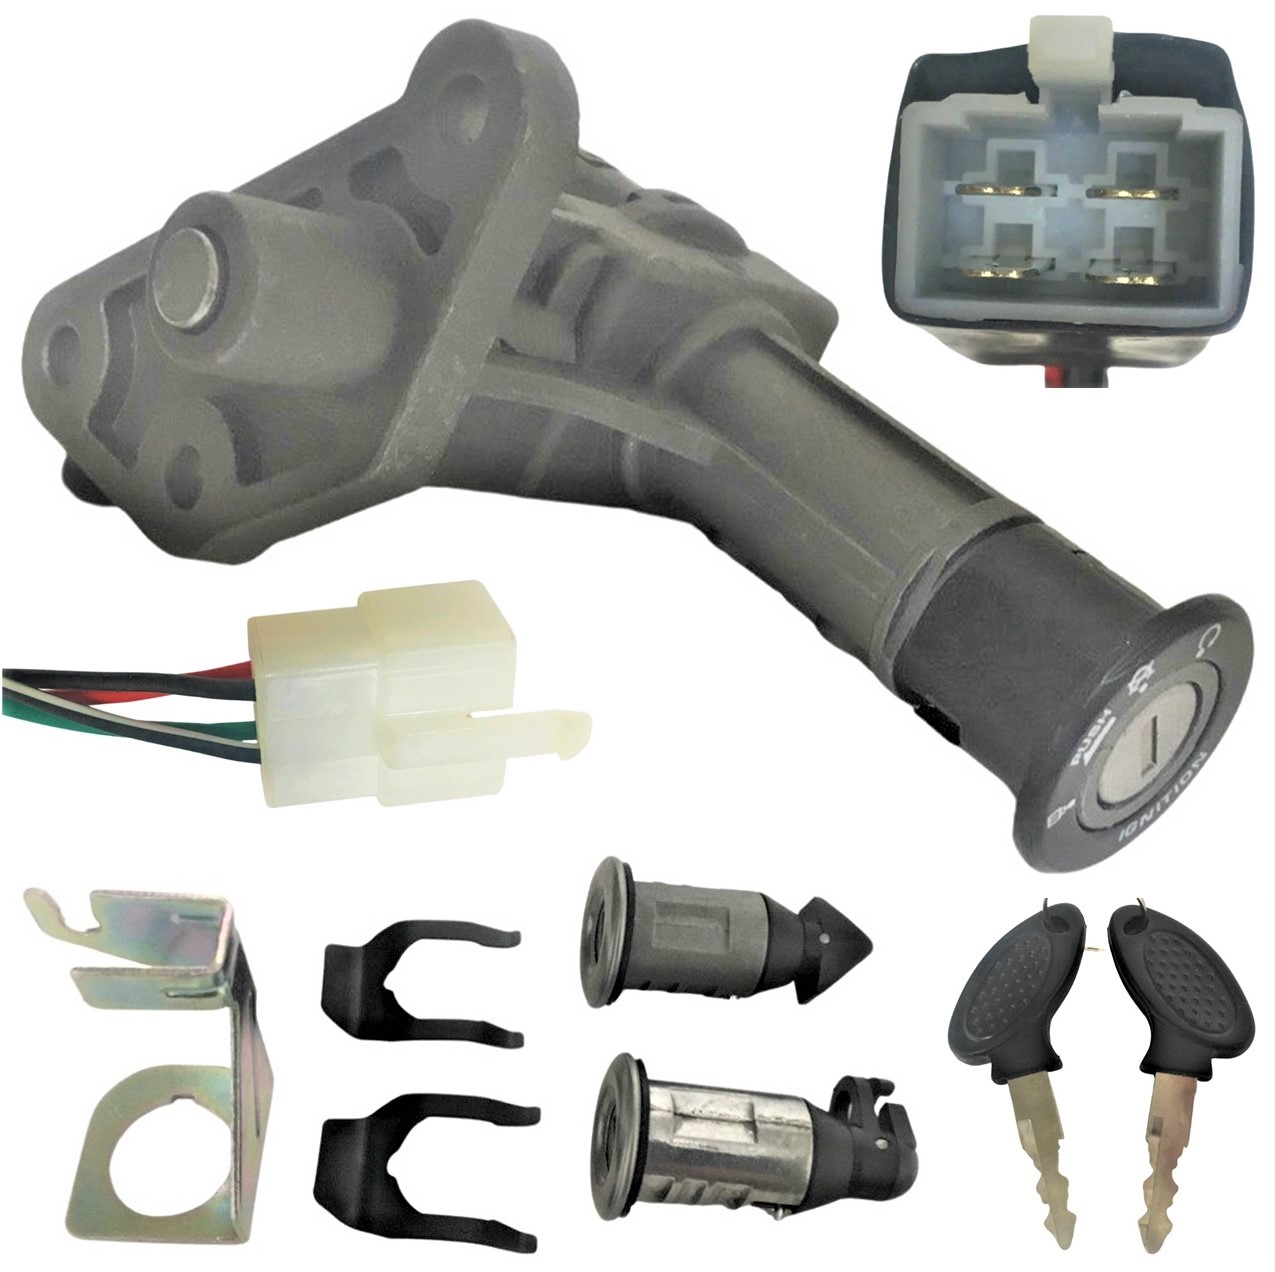 Ignition Switch Set Fits Many Chinese Scooters 4 Pins in 4 Pin FM Jack Bolts c/c=72mm